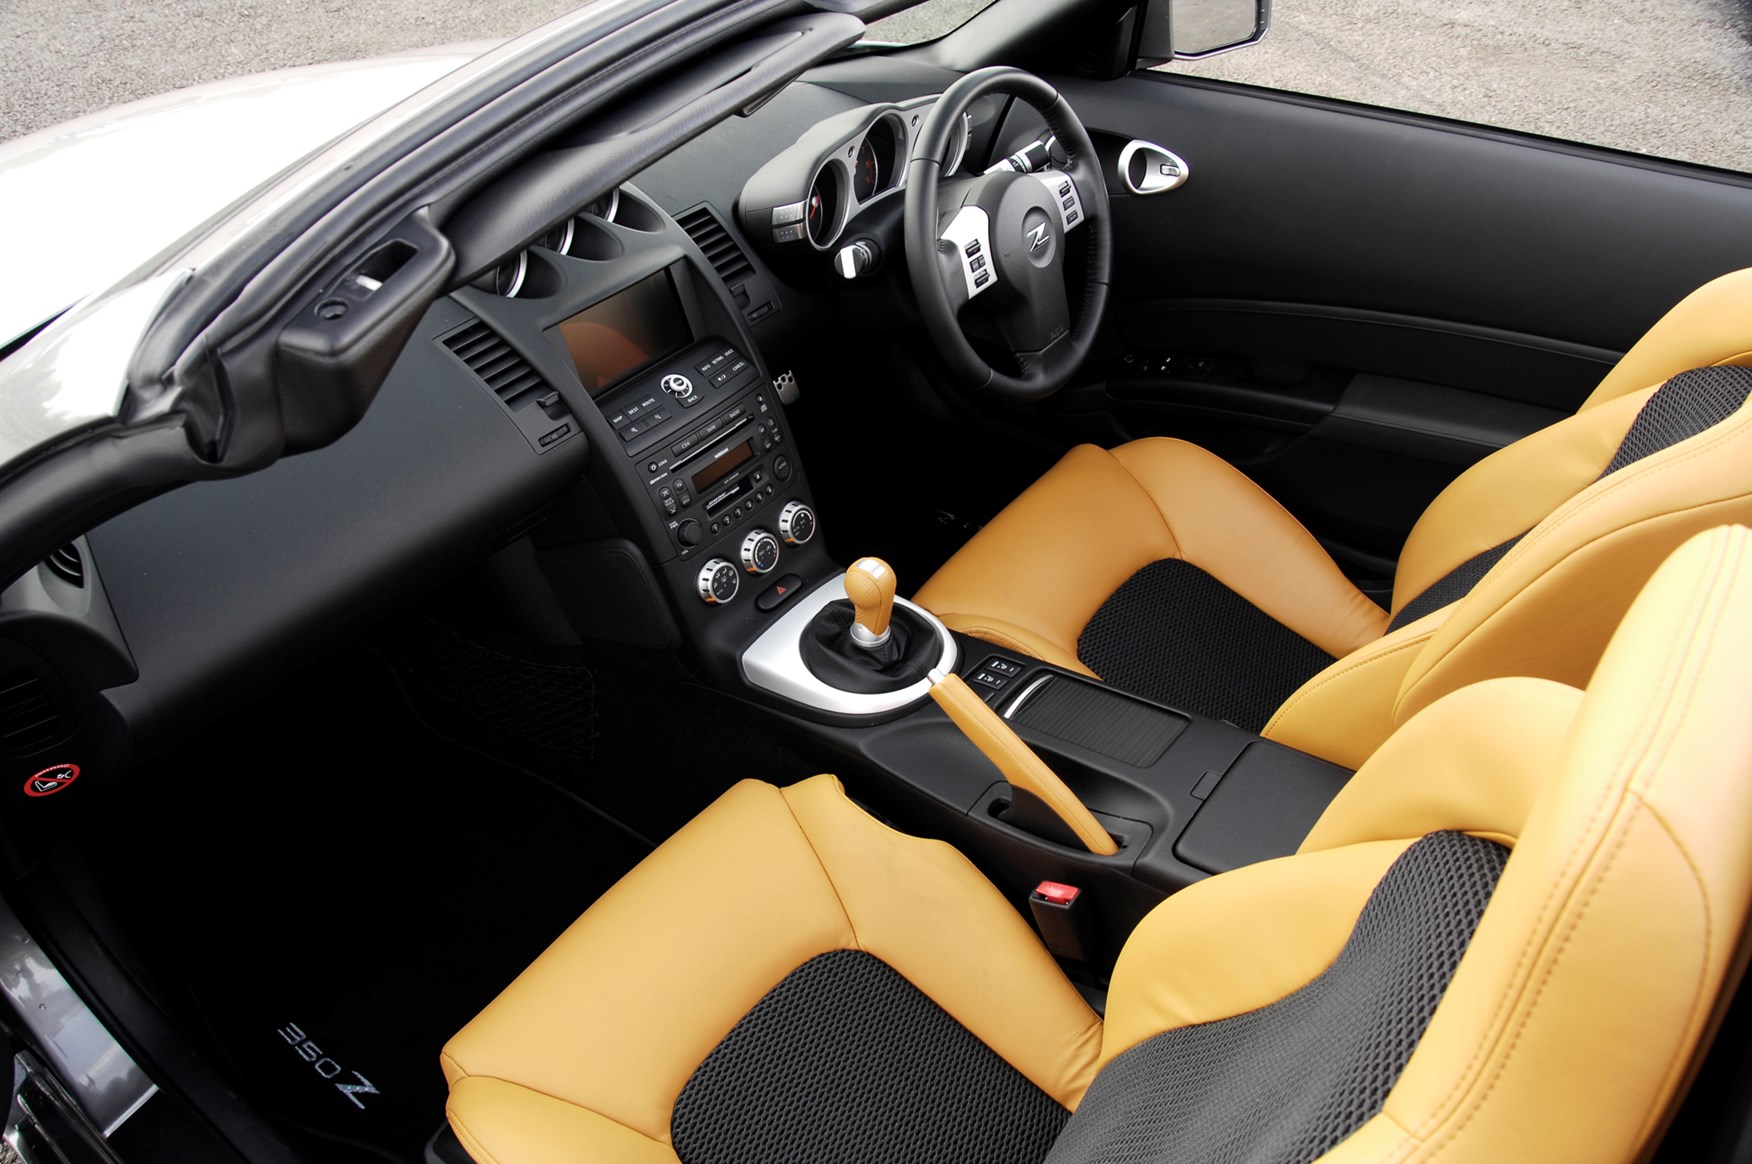 Used Nissan 350Z Roadster (2005 - 2010) interior, tech and c